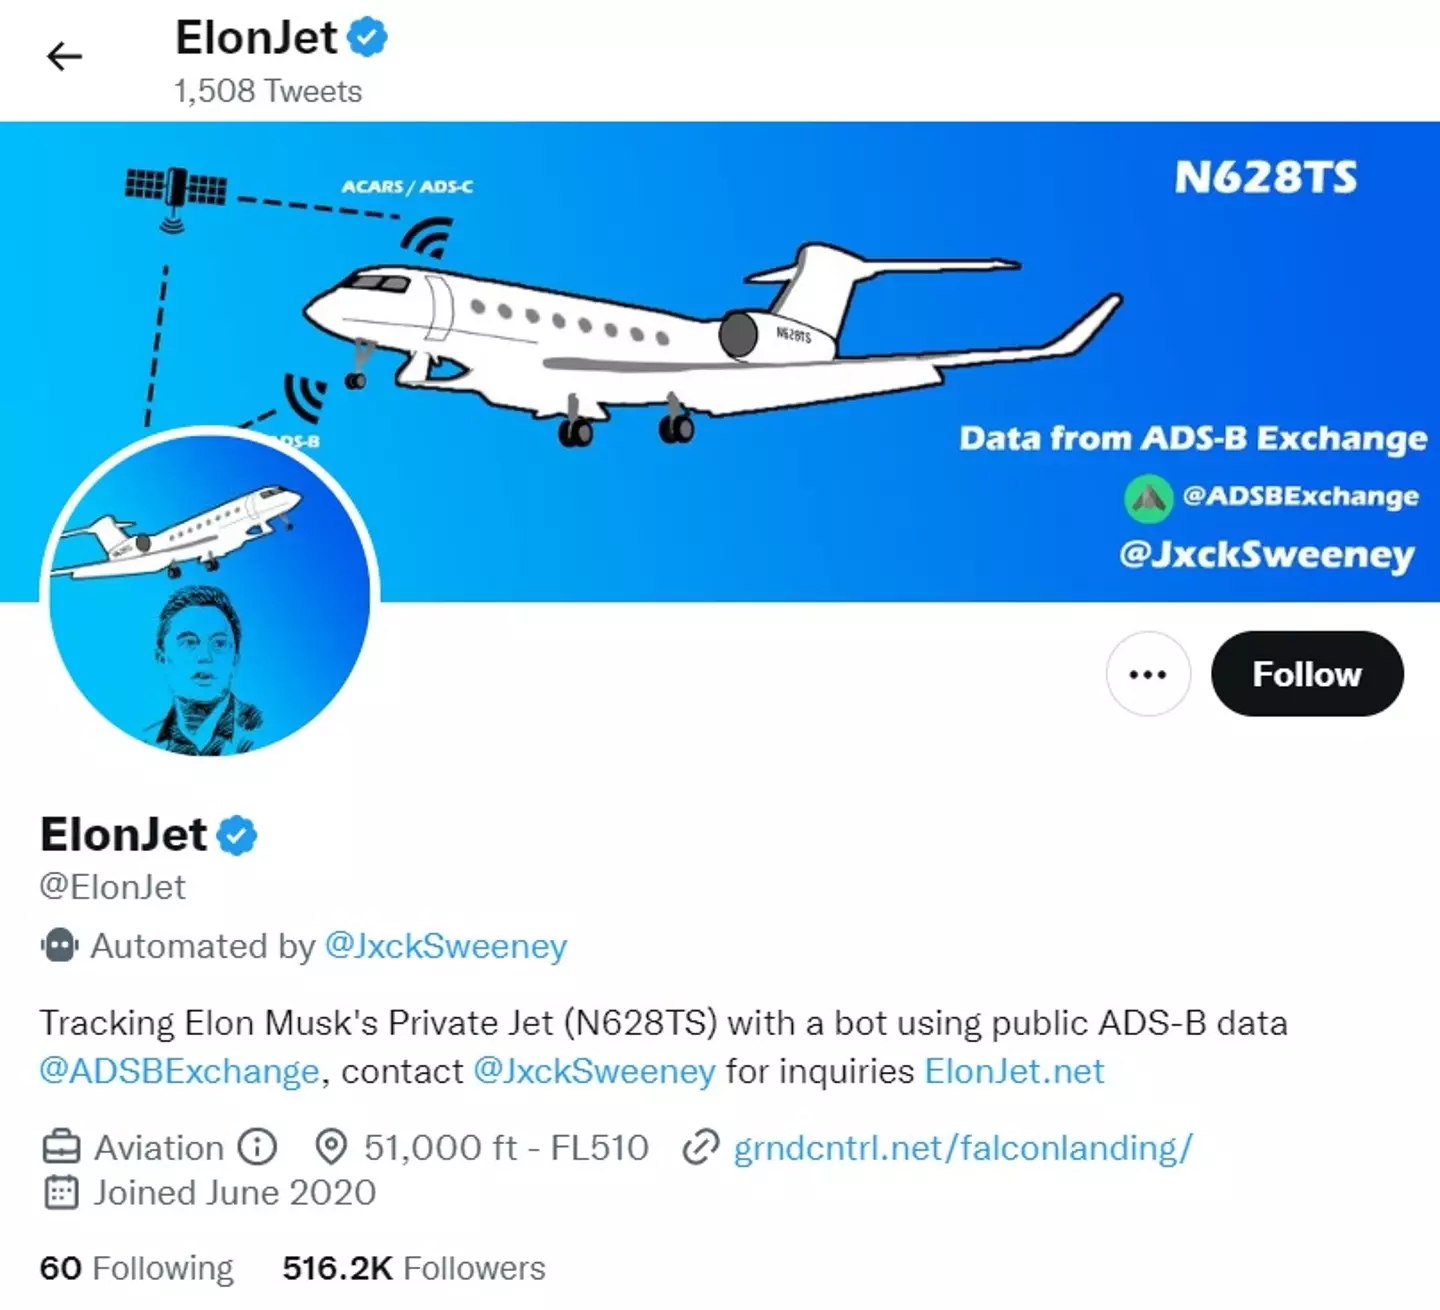 The account is coded to automatically post the journeys made by Elon Musk's private jet.